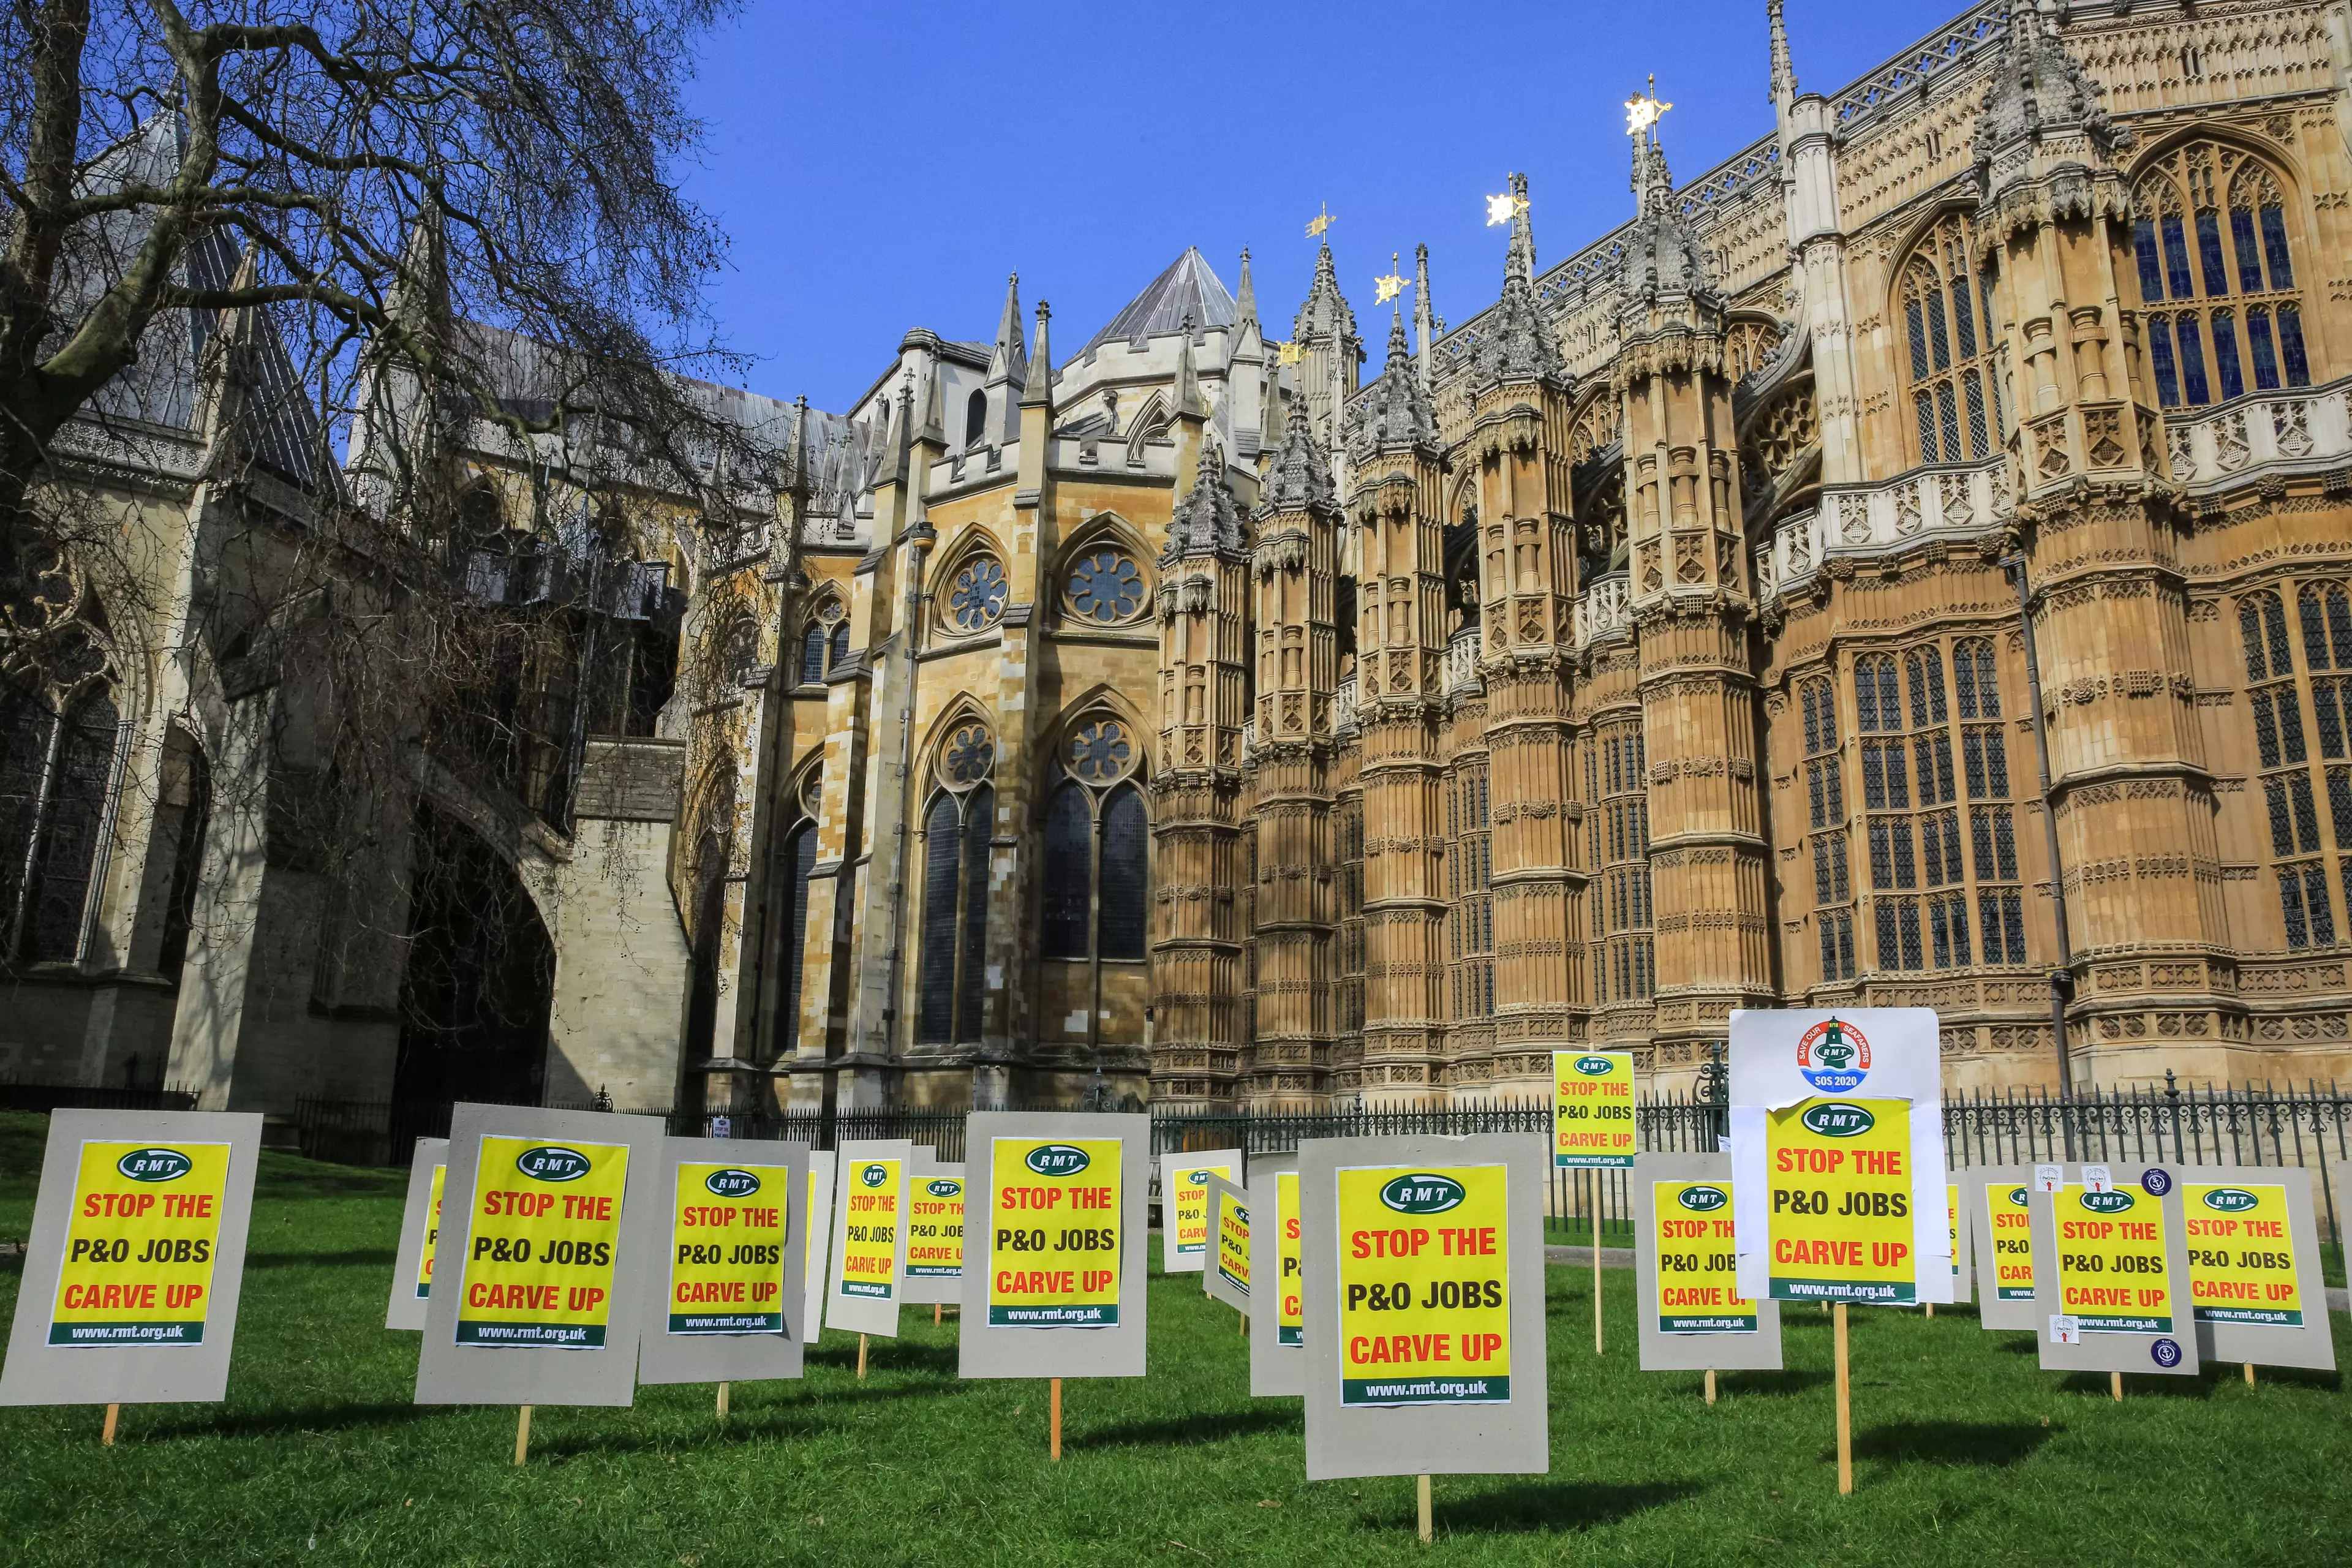 Protests have taken place in Westminster after the sackings.